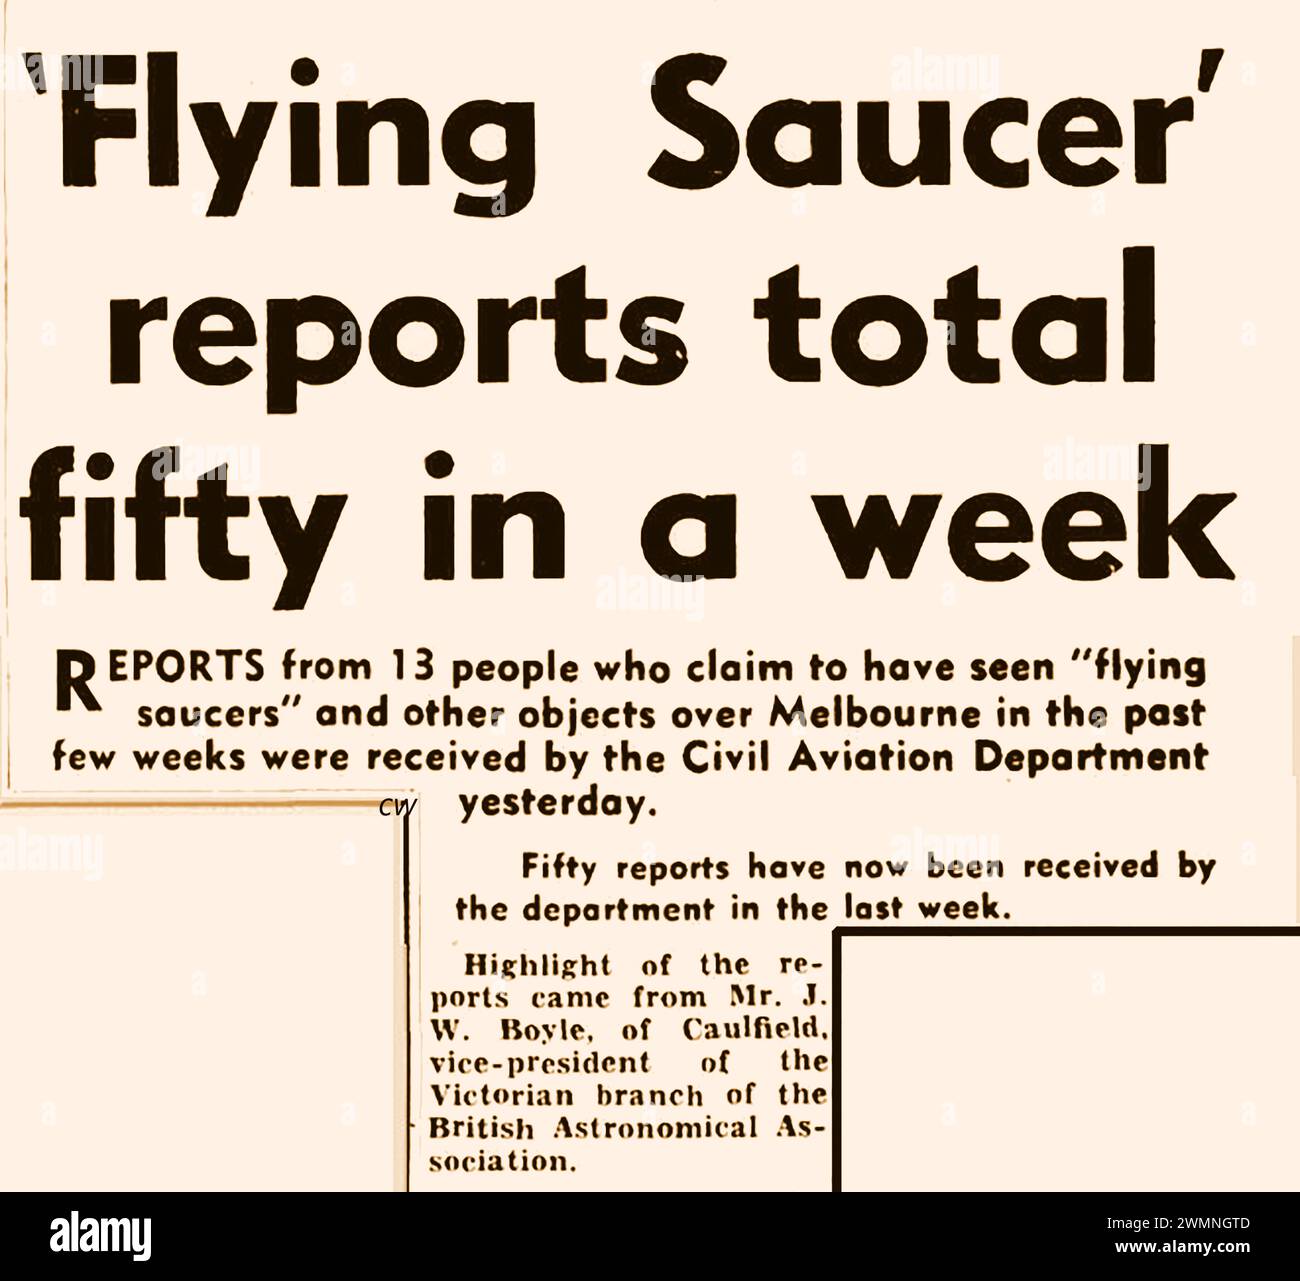 Press cutting, 12 January 1954 - Australian report of 50 flying saucers  over Melbourne in one week Stock Photo